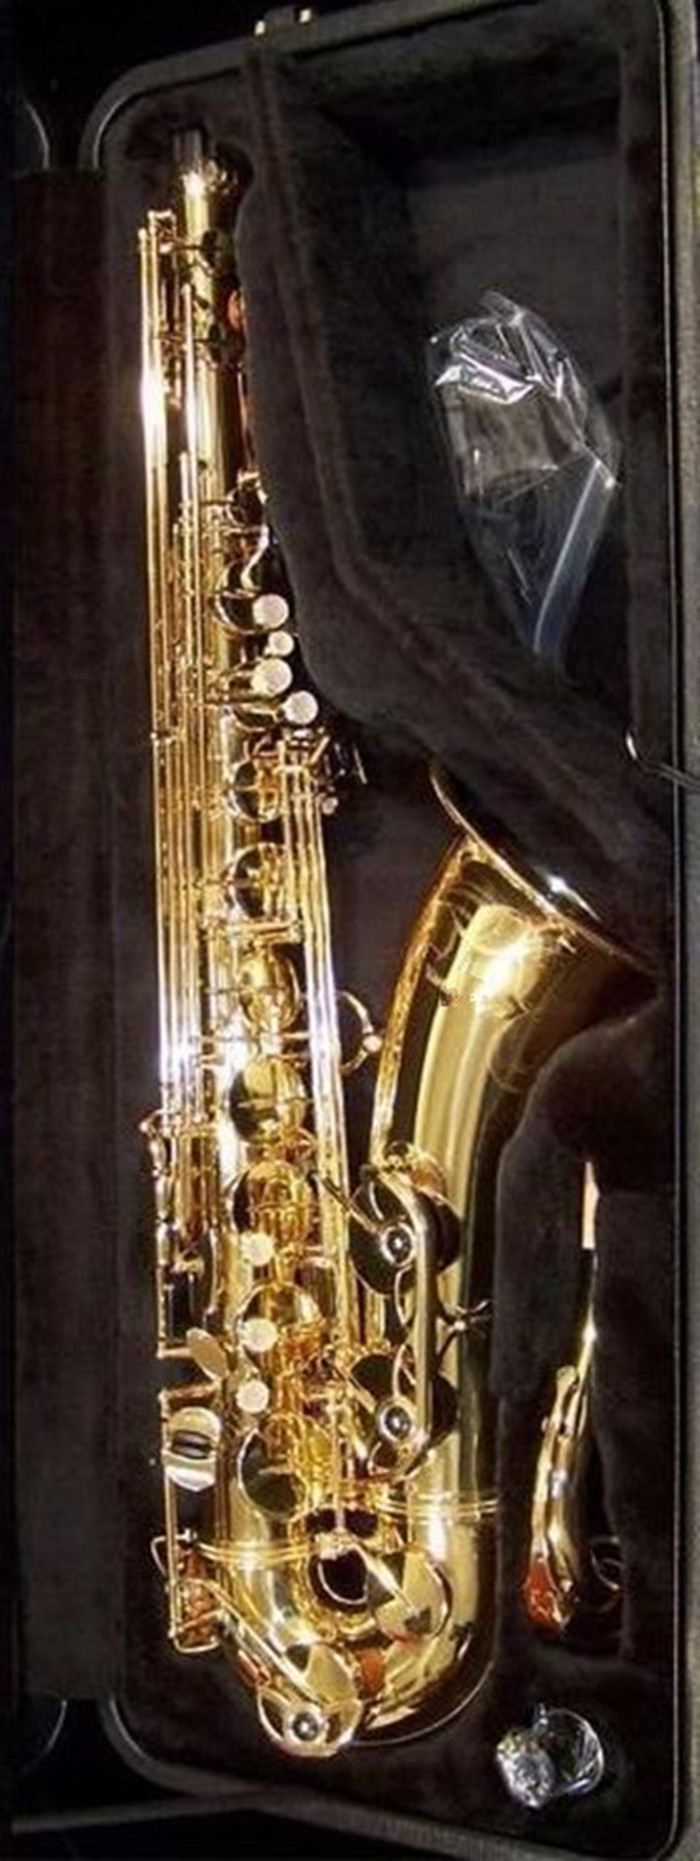 Japan T-902 Bb Tenor High Quality Saxophone Brass Gold-plated B Flat Music Instrument With Case, Mouthpiece